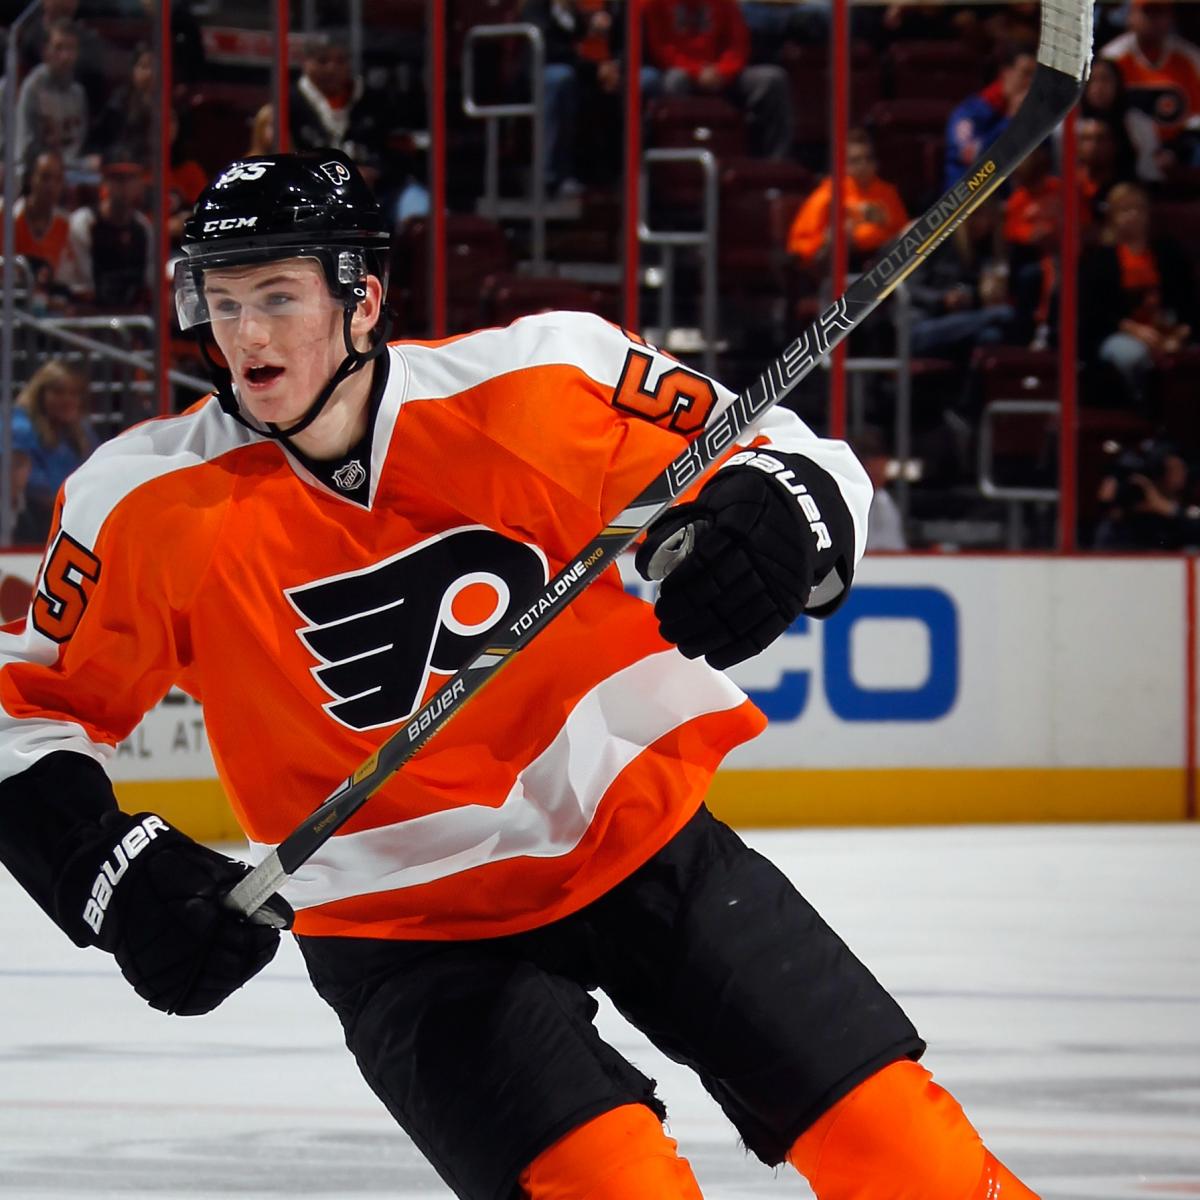 Ranking the Philadelphia Flyers Prospects with the Highest Upside